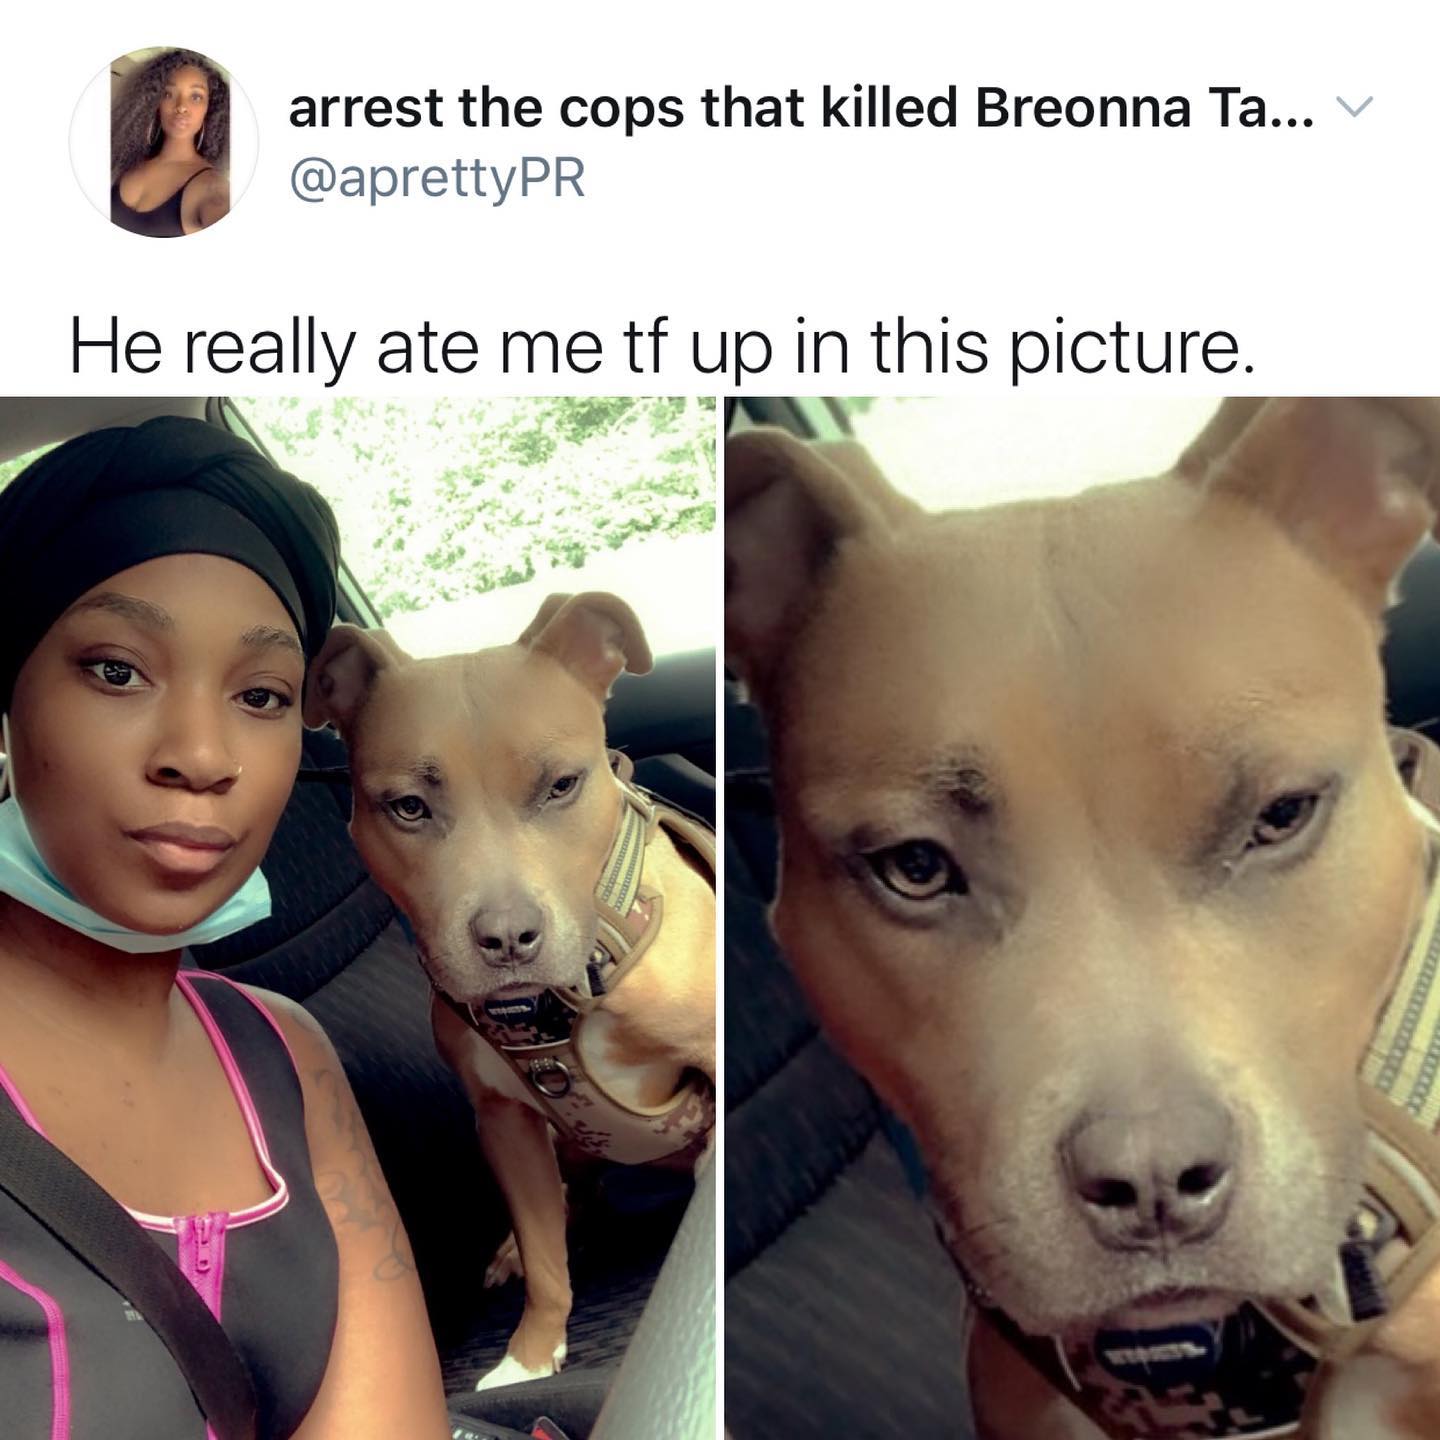 dank memes - twitter - photo caption - arrest the cops that killed Breonna Ta... He really ate me tf up in this picture.